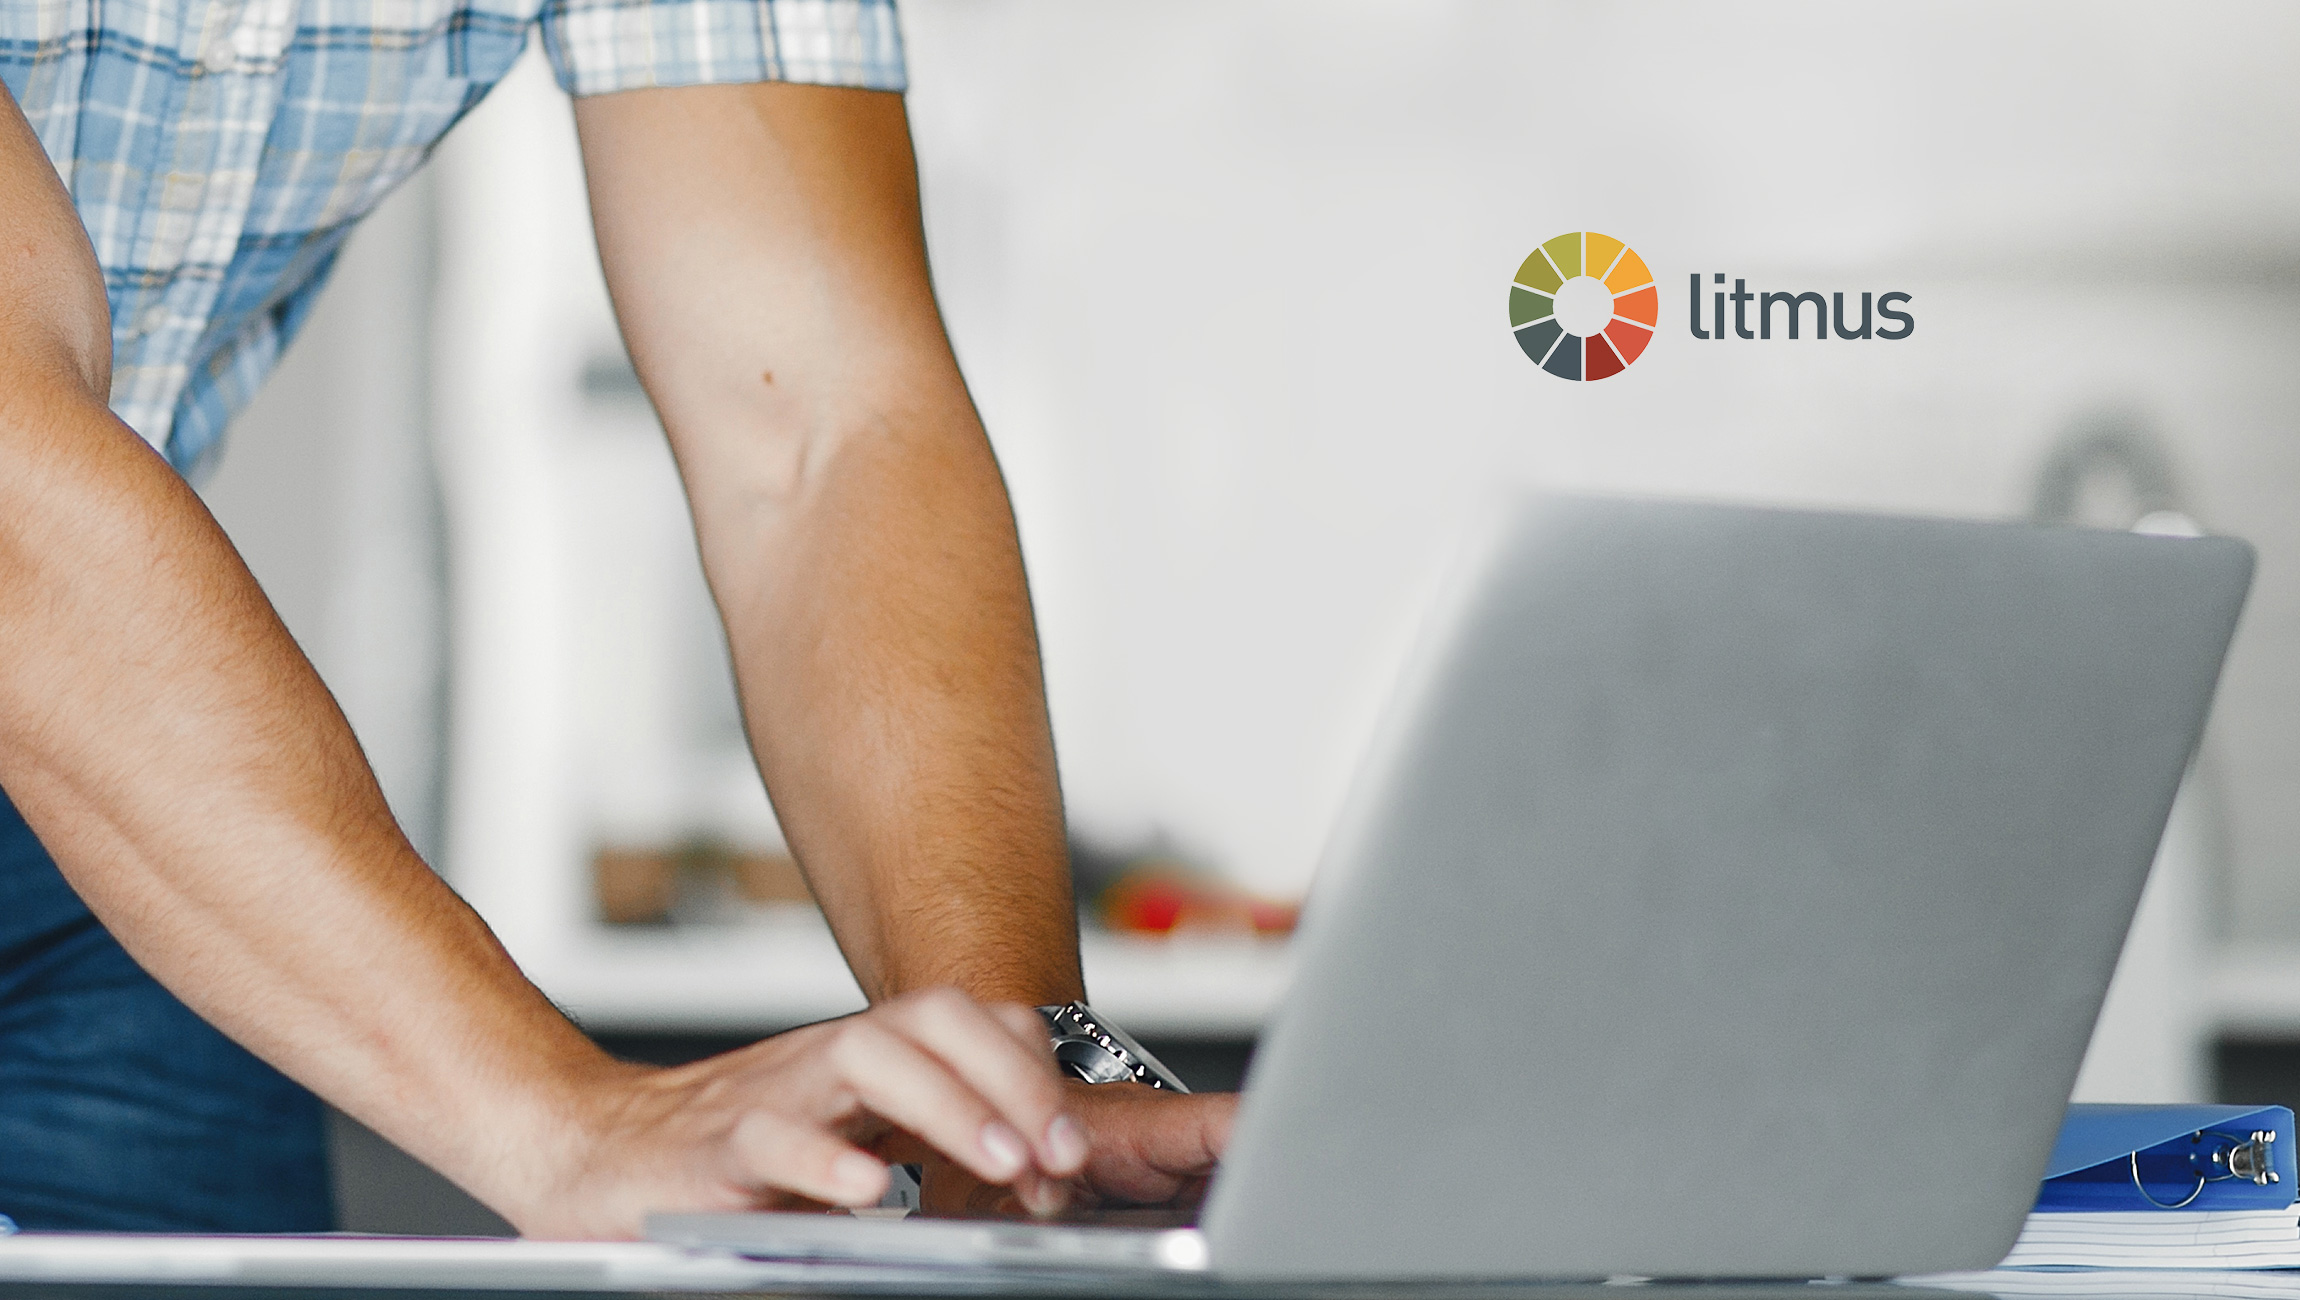 Litmus Debuts New Features to Reduce Email Development Time by 75%